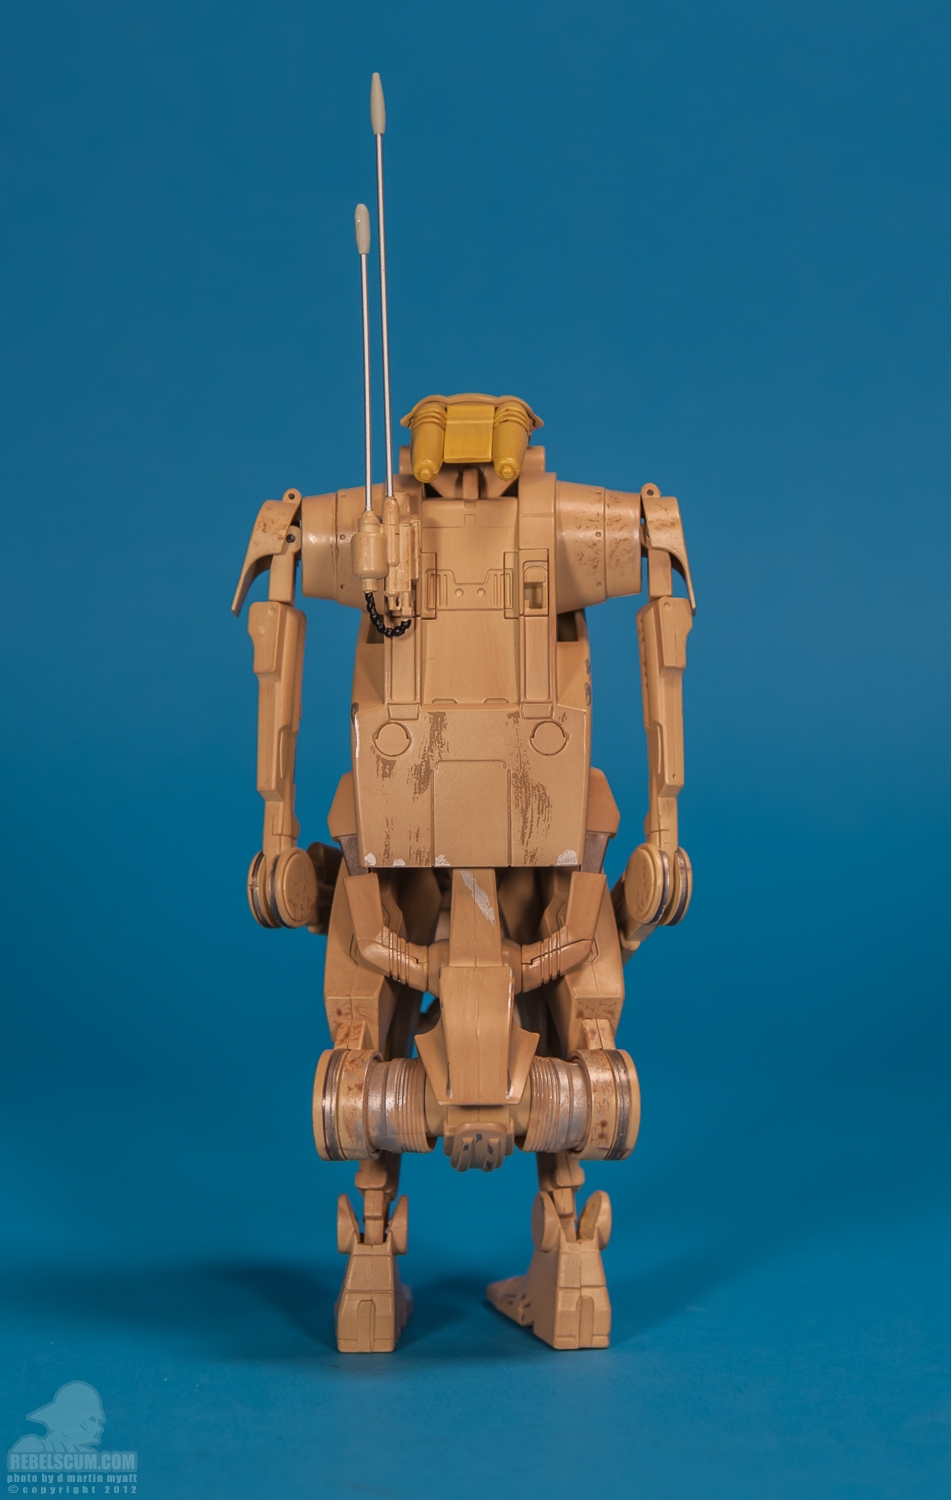 OOM-9_Battle_Droid_Commander_Sideshow_Collectibles-08.jpg